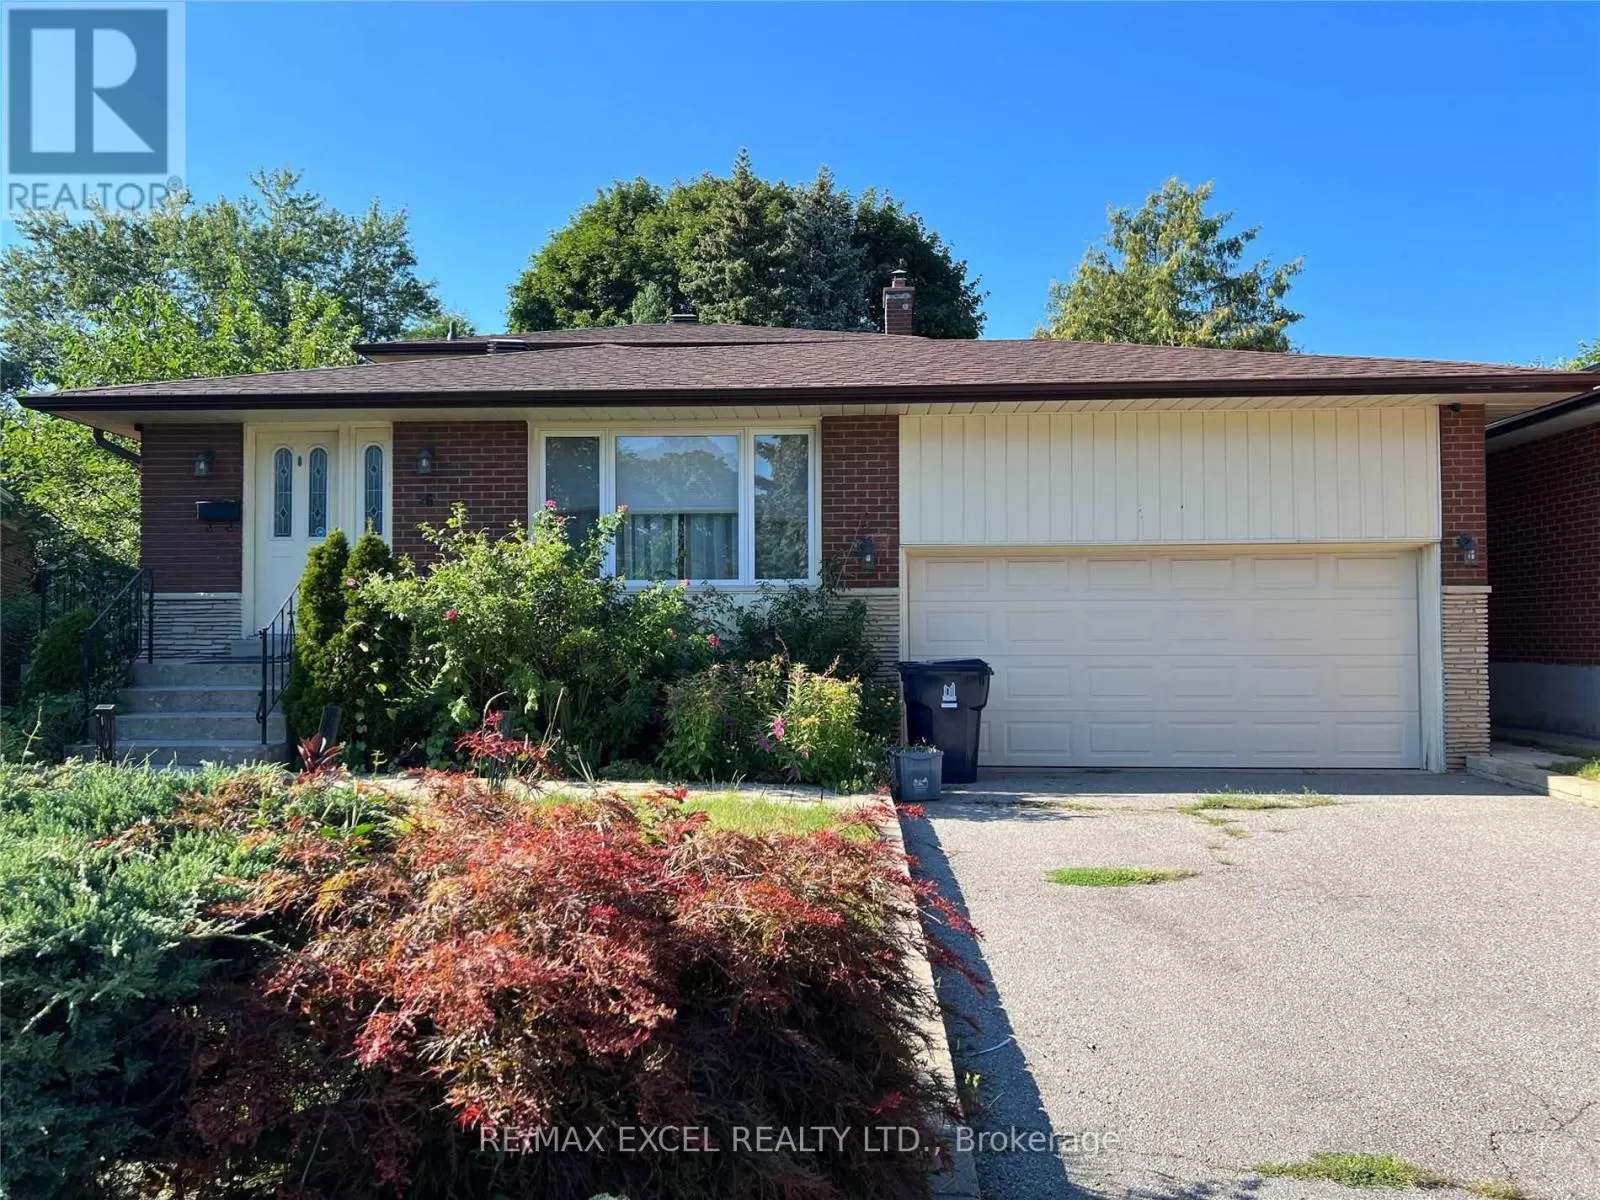 House for rent: #lower -26 Stainforth Dr, Toronto, Ontario M1S 1L8